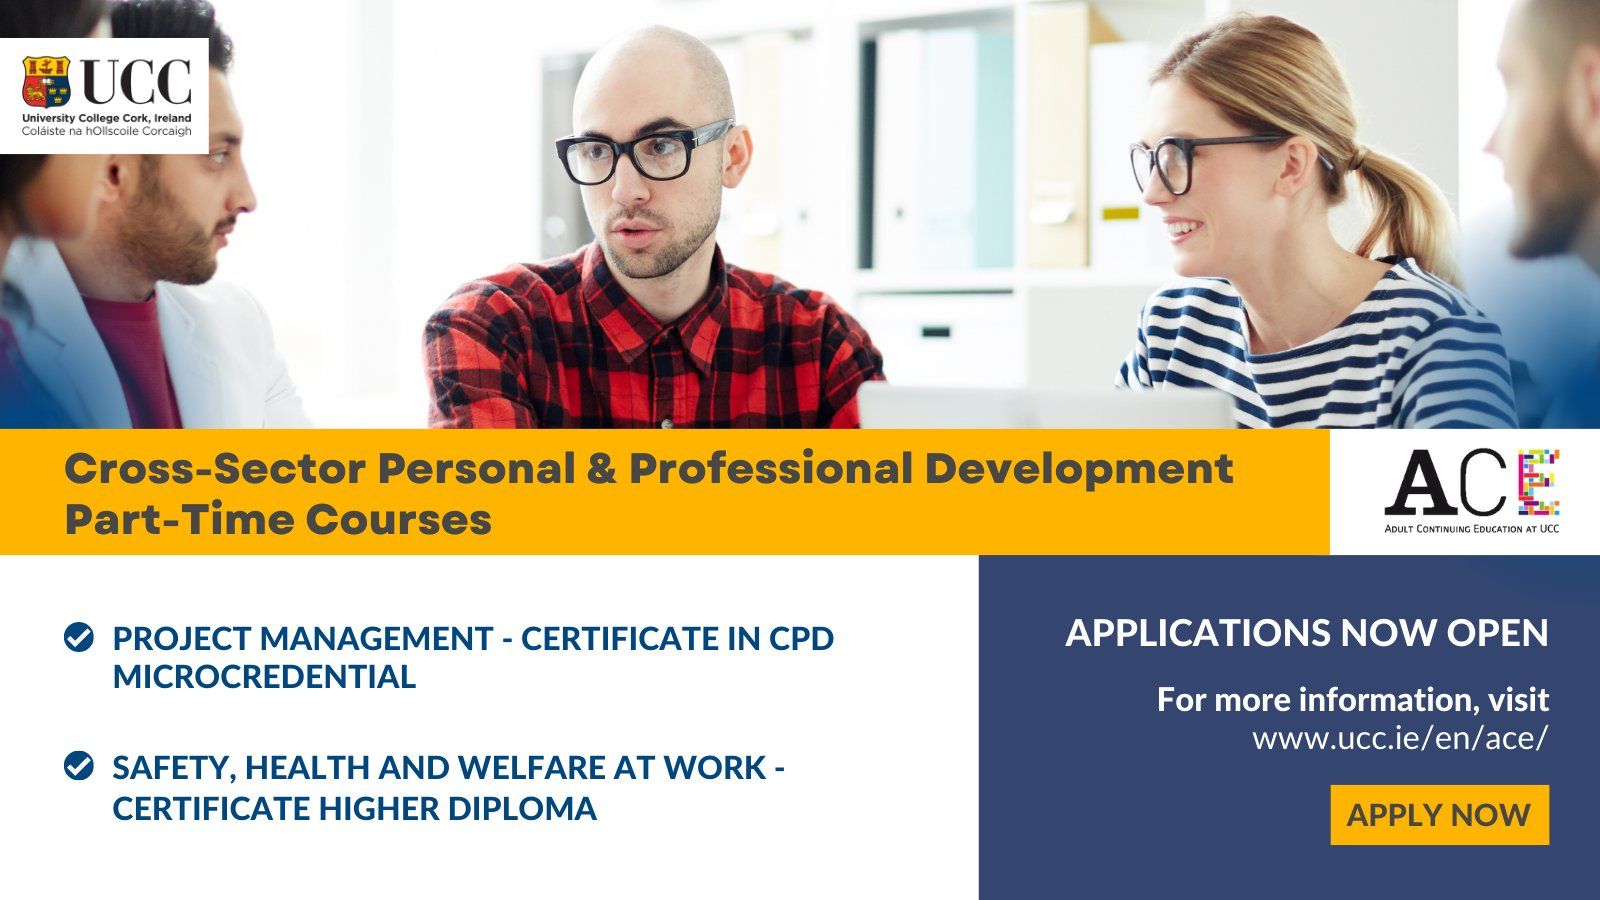 Cross-Sector Personal & Professional Development Part Time Courses Now Open 